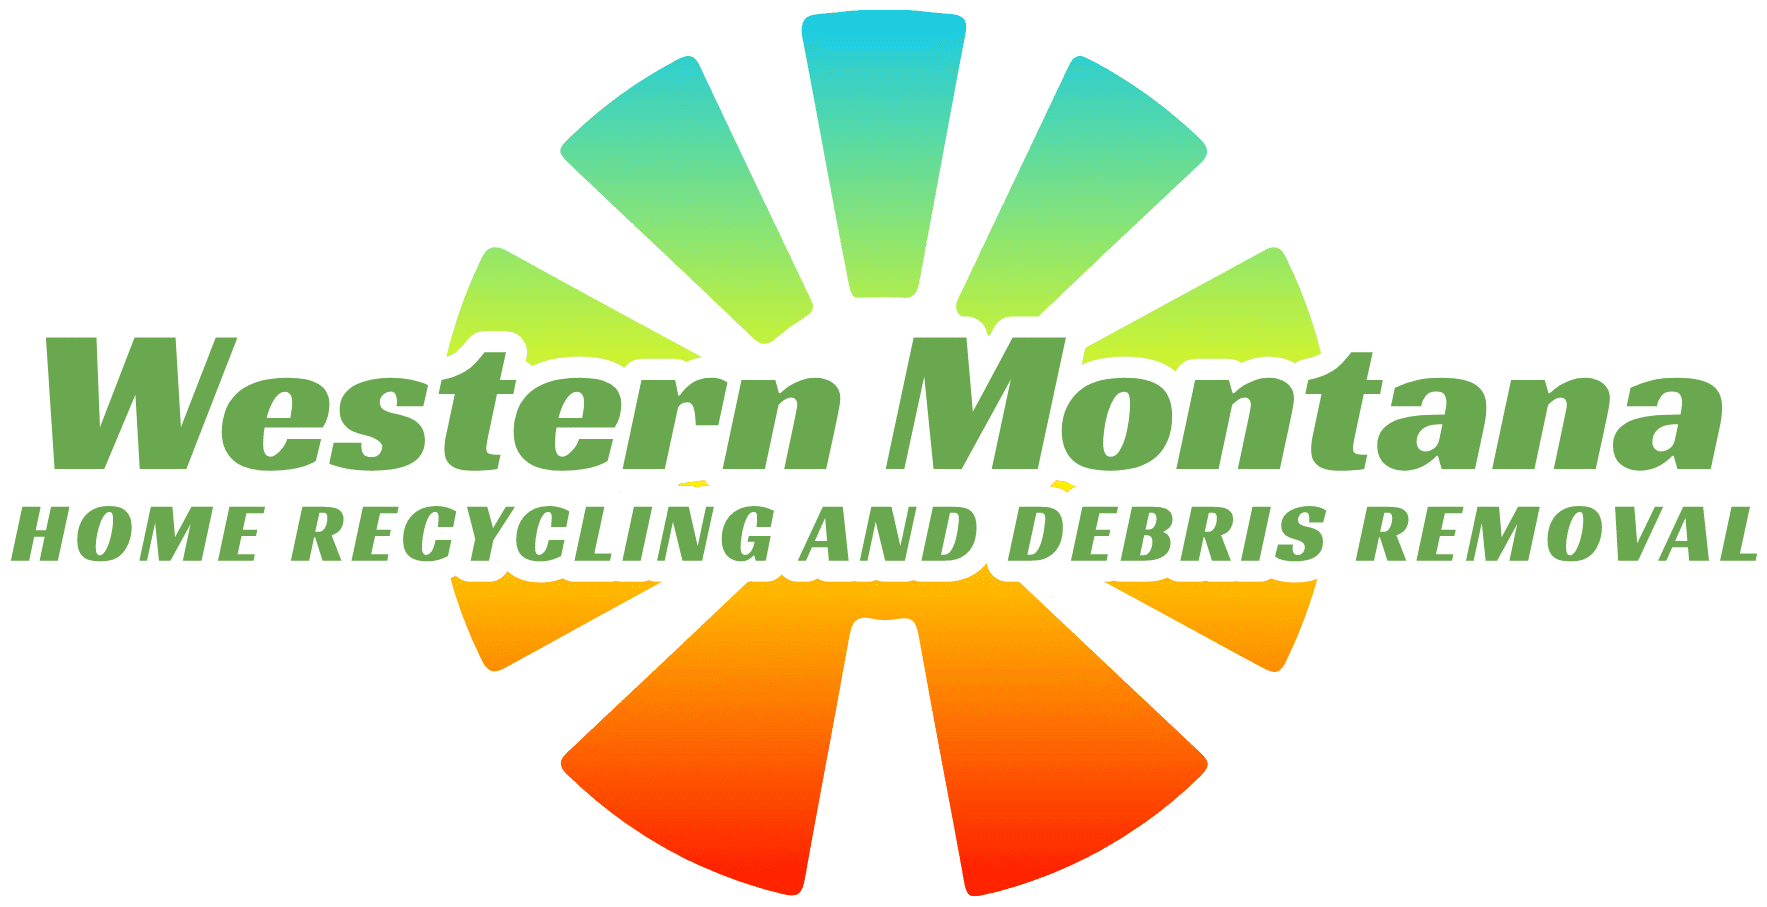 Western Montana Home Recycling and Debris Removal Logo